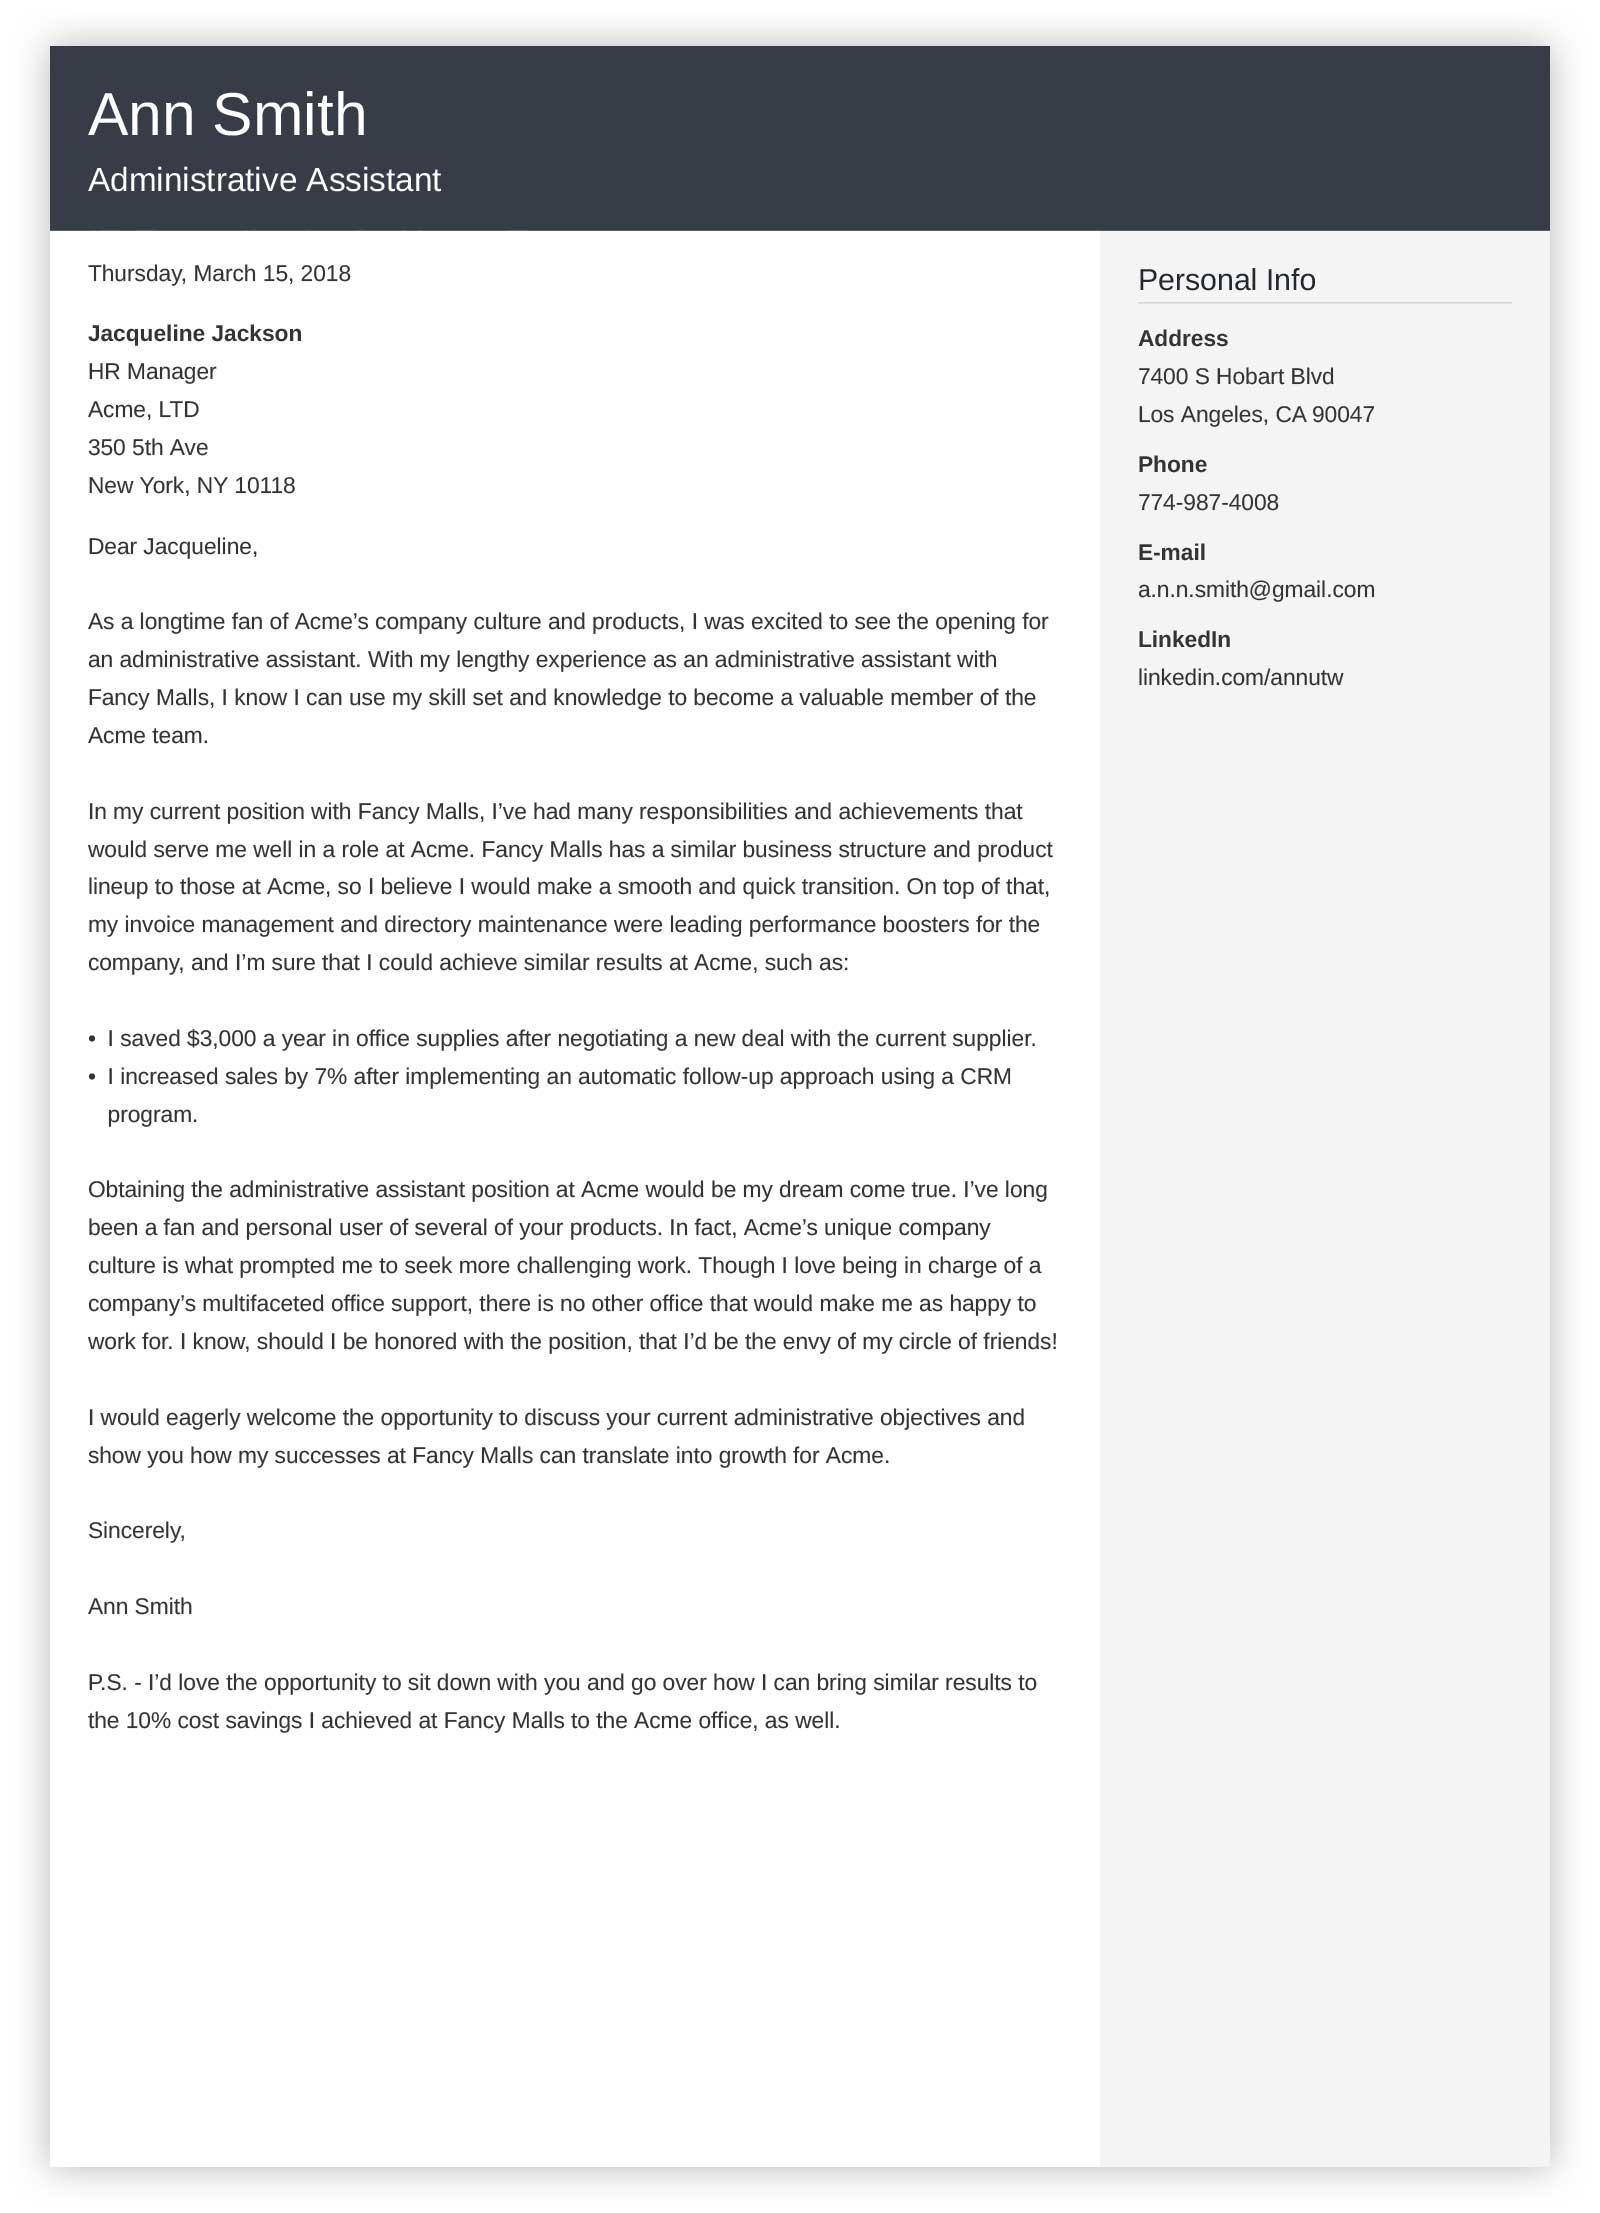 Sample Cover Letter Administrative Assistant from cdn-images.zety.com